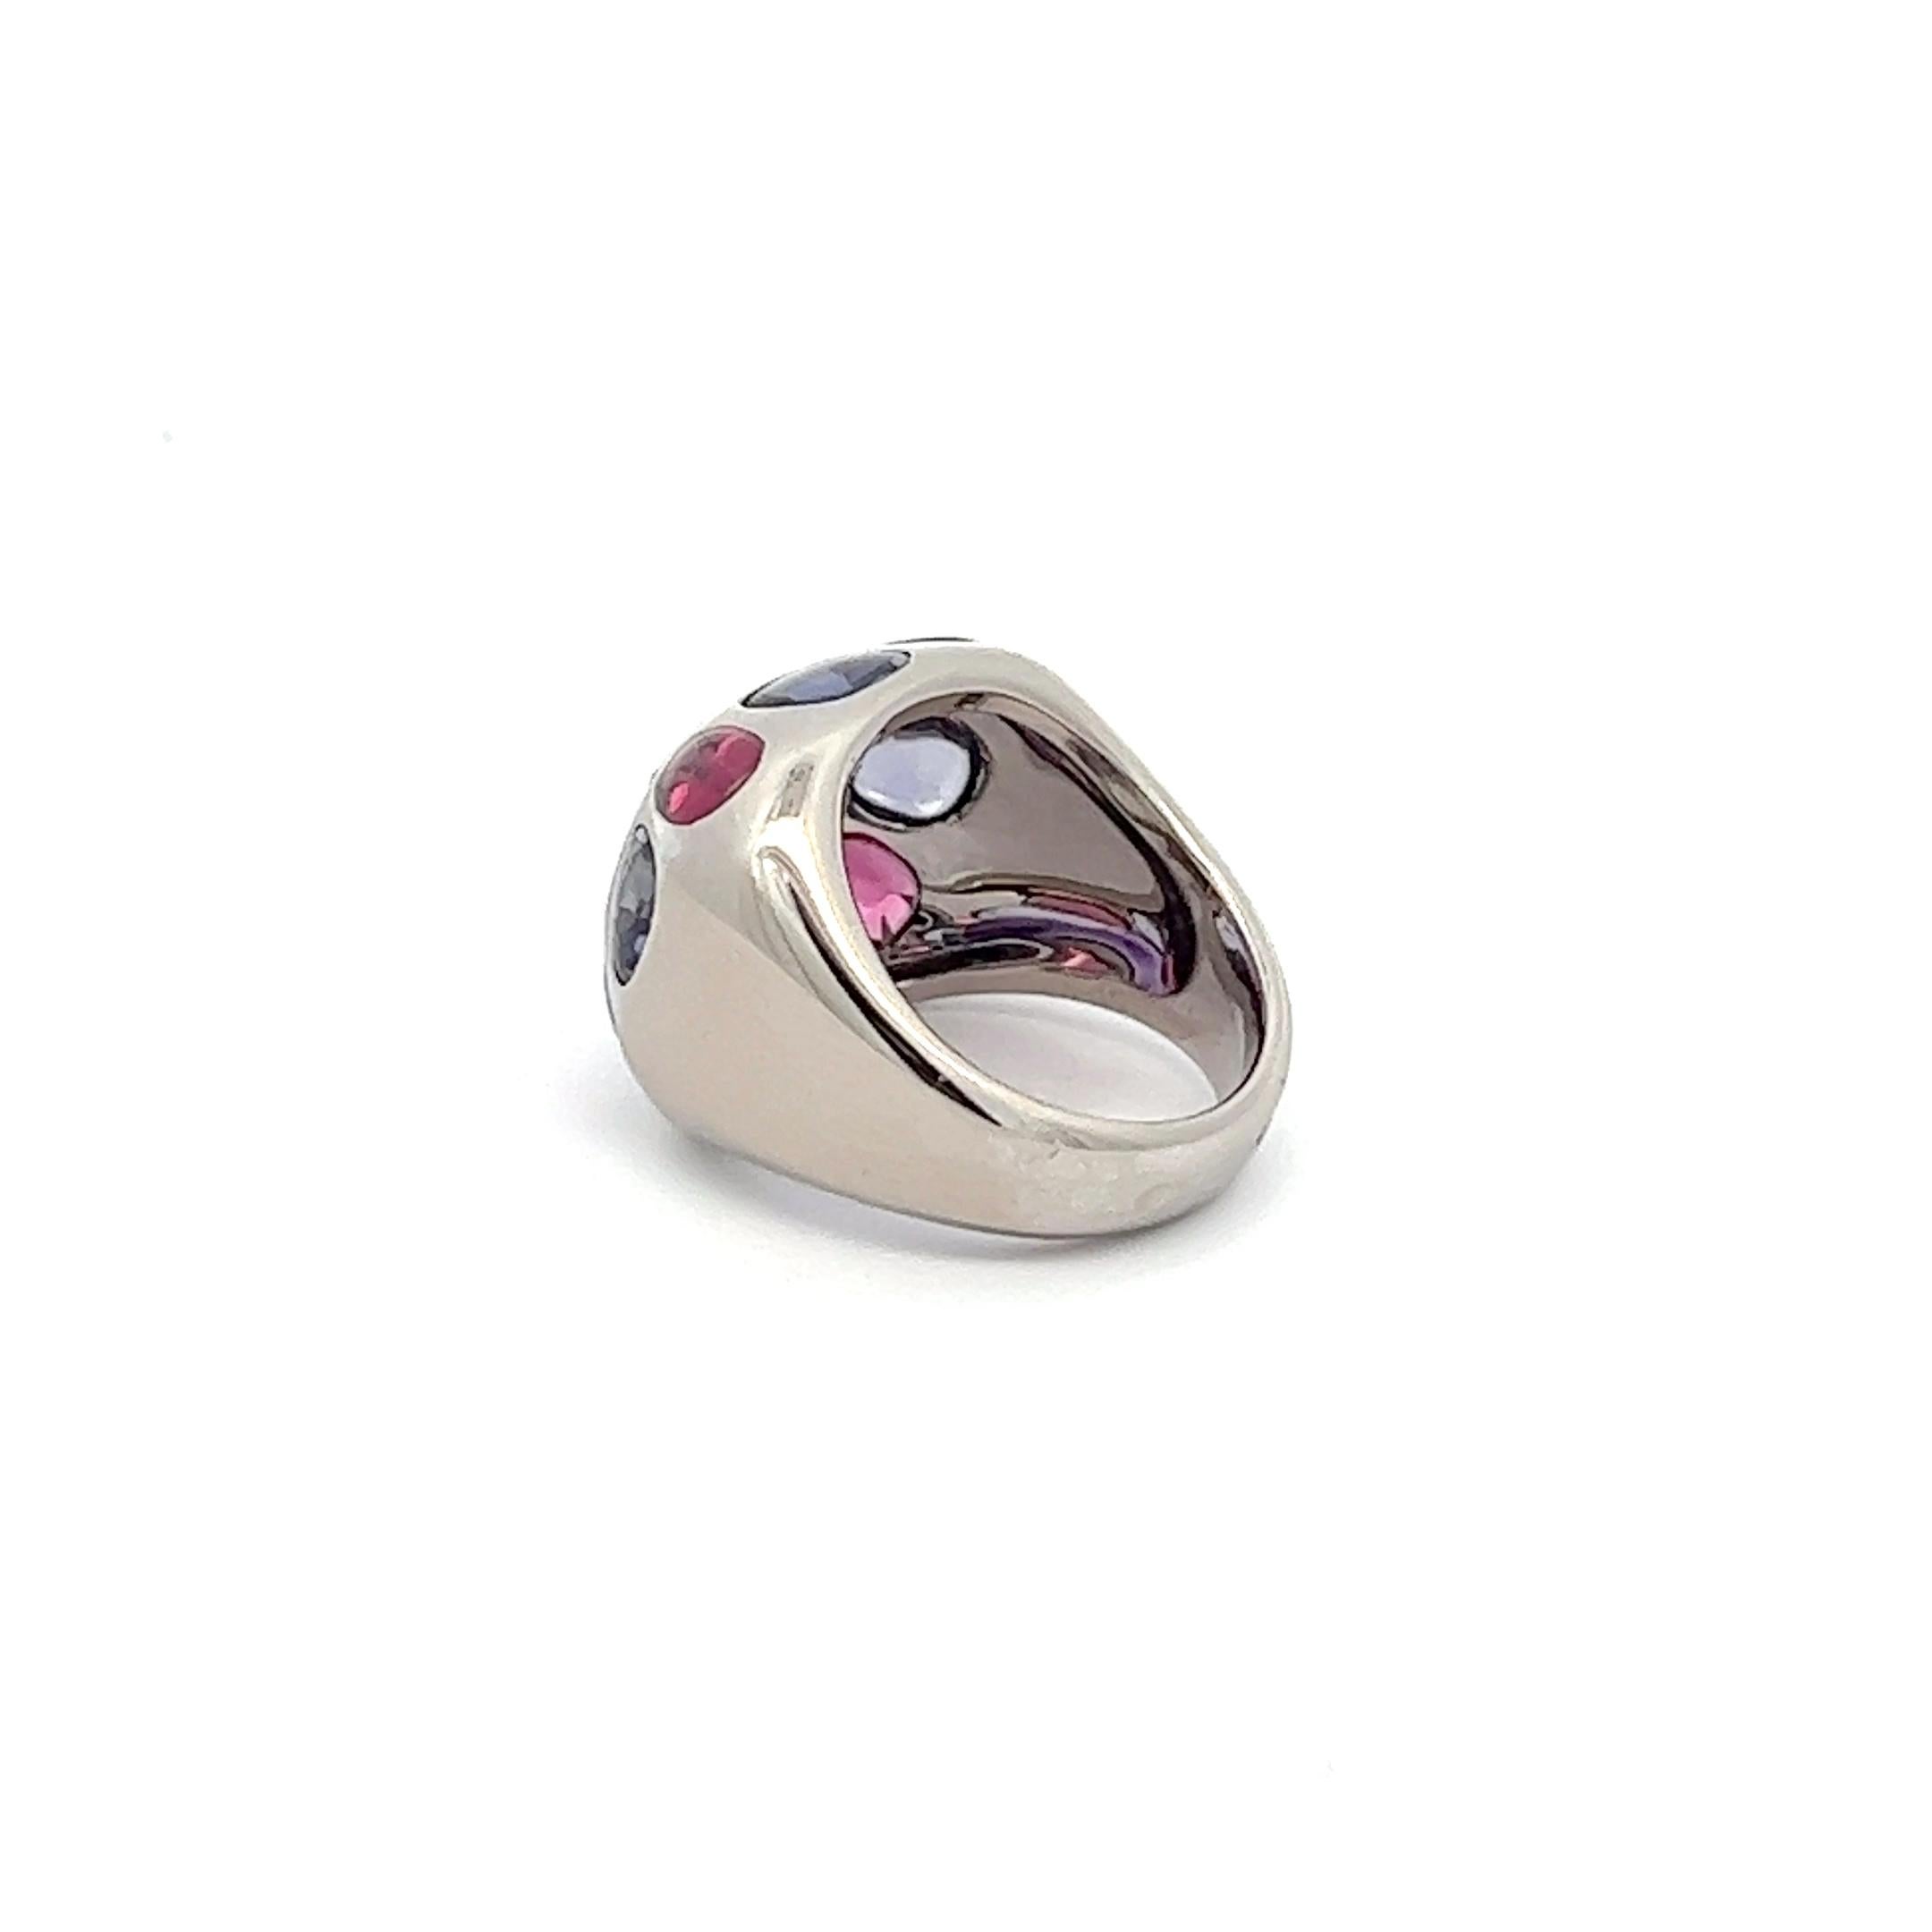 An 18ik white gold ring by Chanel.
The ring is set with Amethyst, Garnet and Iolite. 
The ring is size 52 and can't be resized.
The ring was made in France in the 1990s.
The ring is hallmarked with the French hallmark for 18k gold and French makers